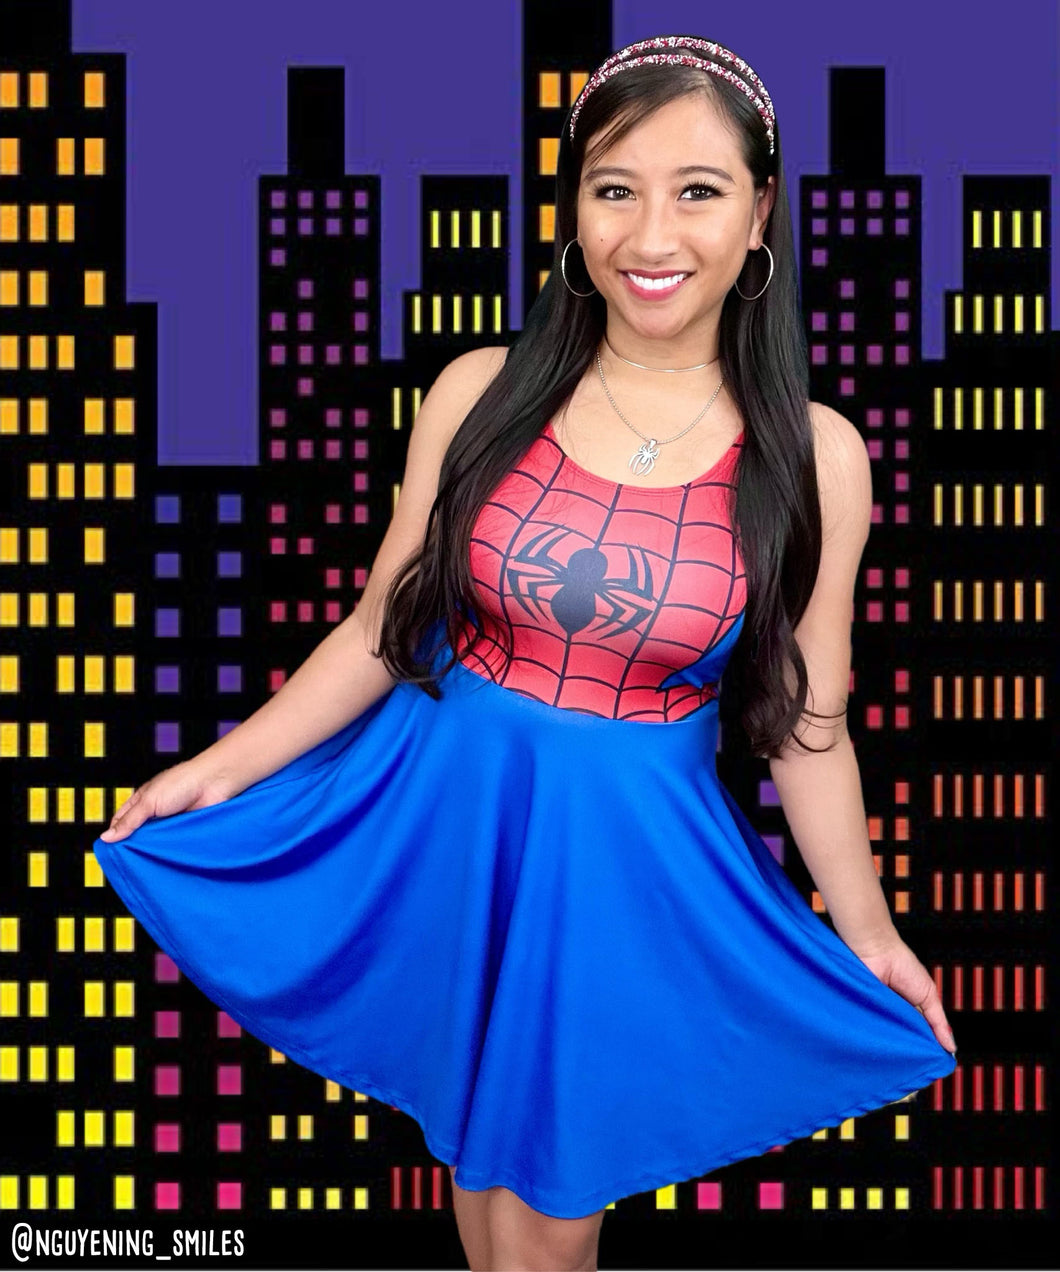 Spiderman Costumes For Adults & Kids | Oriental Trading Company